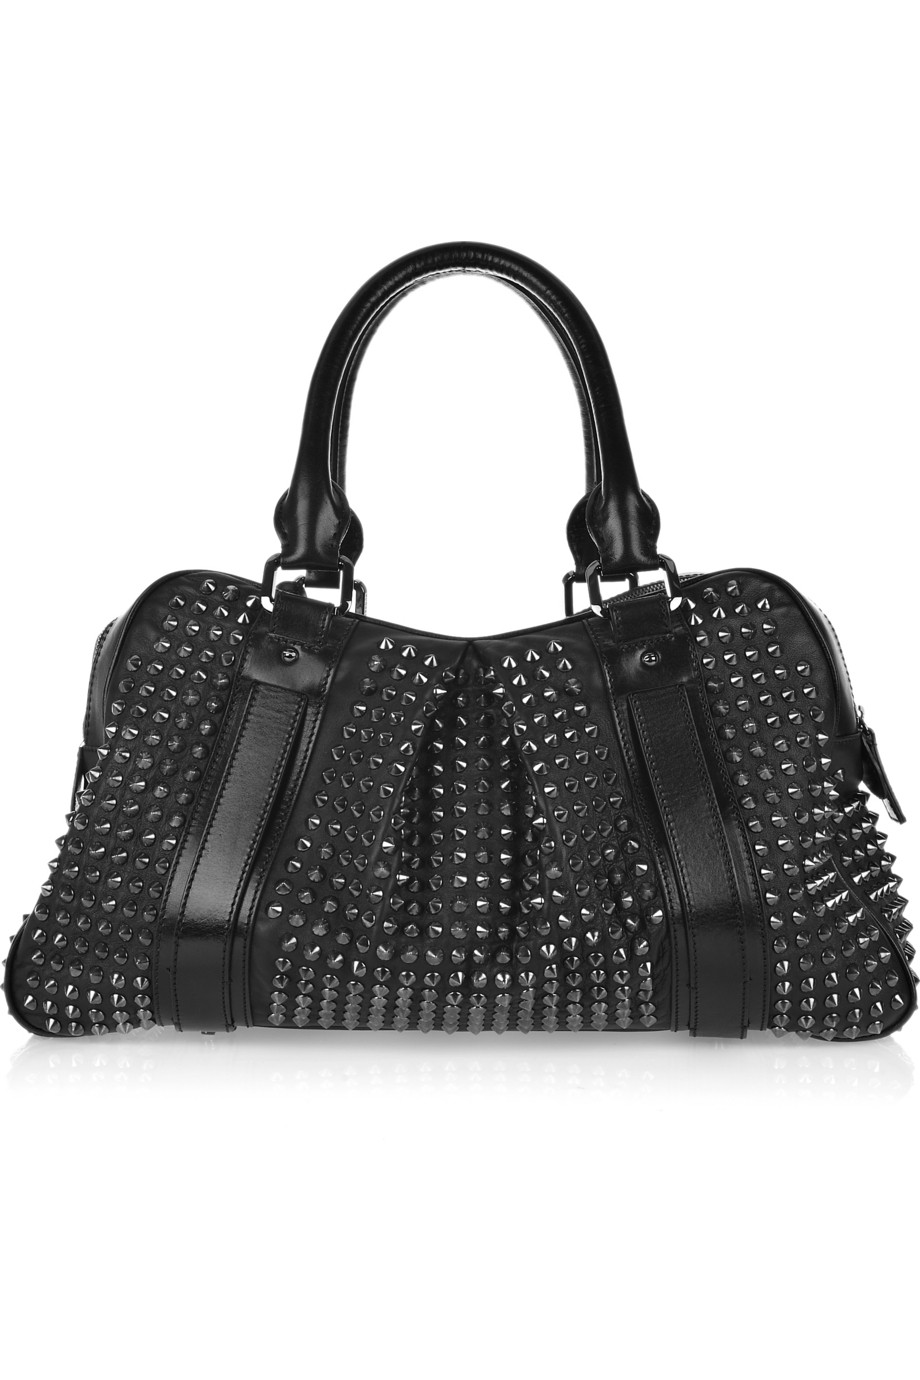 Burberry Studded Leather Knight Bag in Black - Lyst